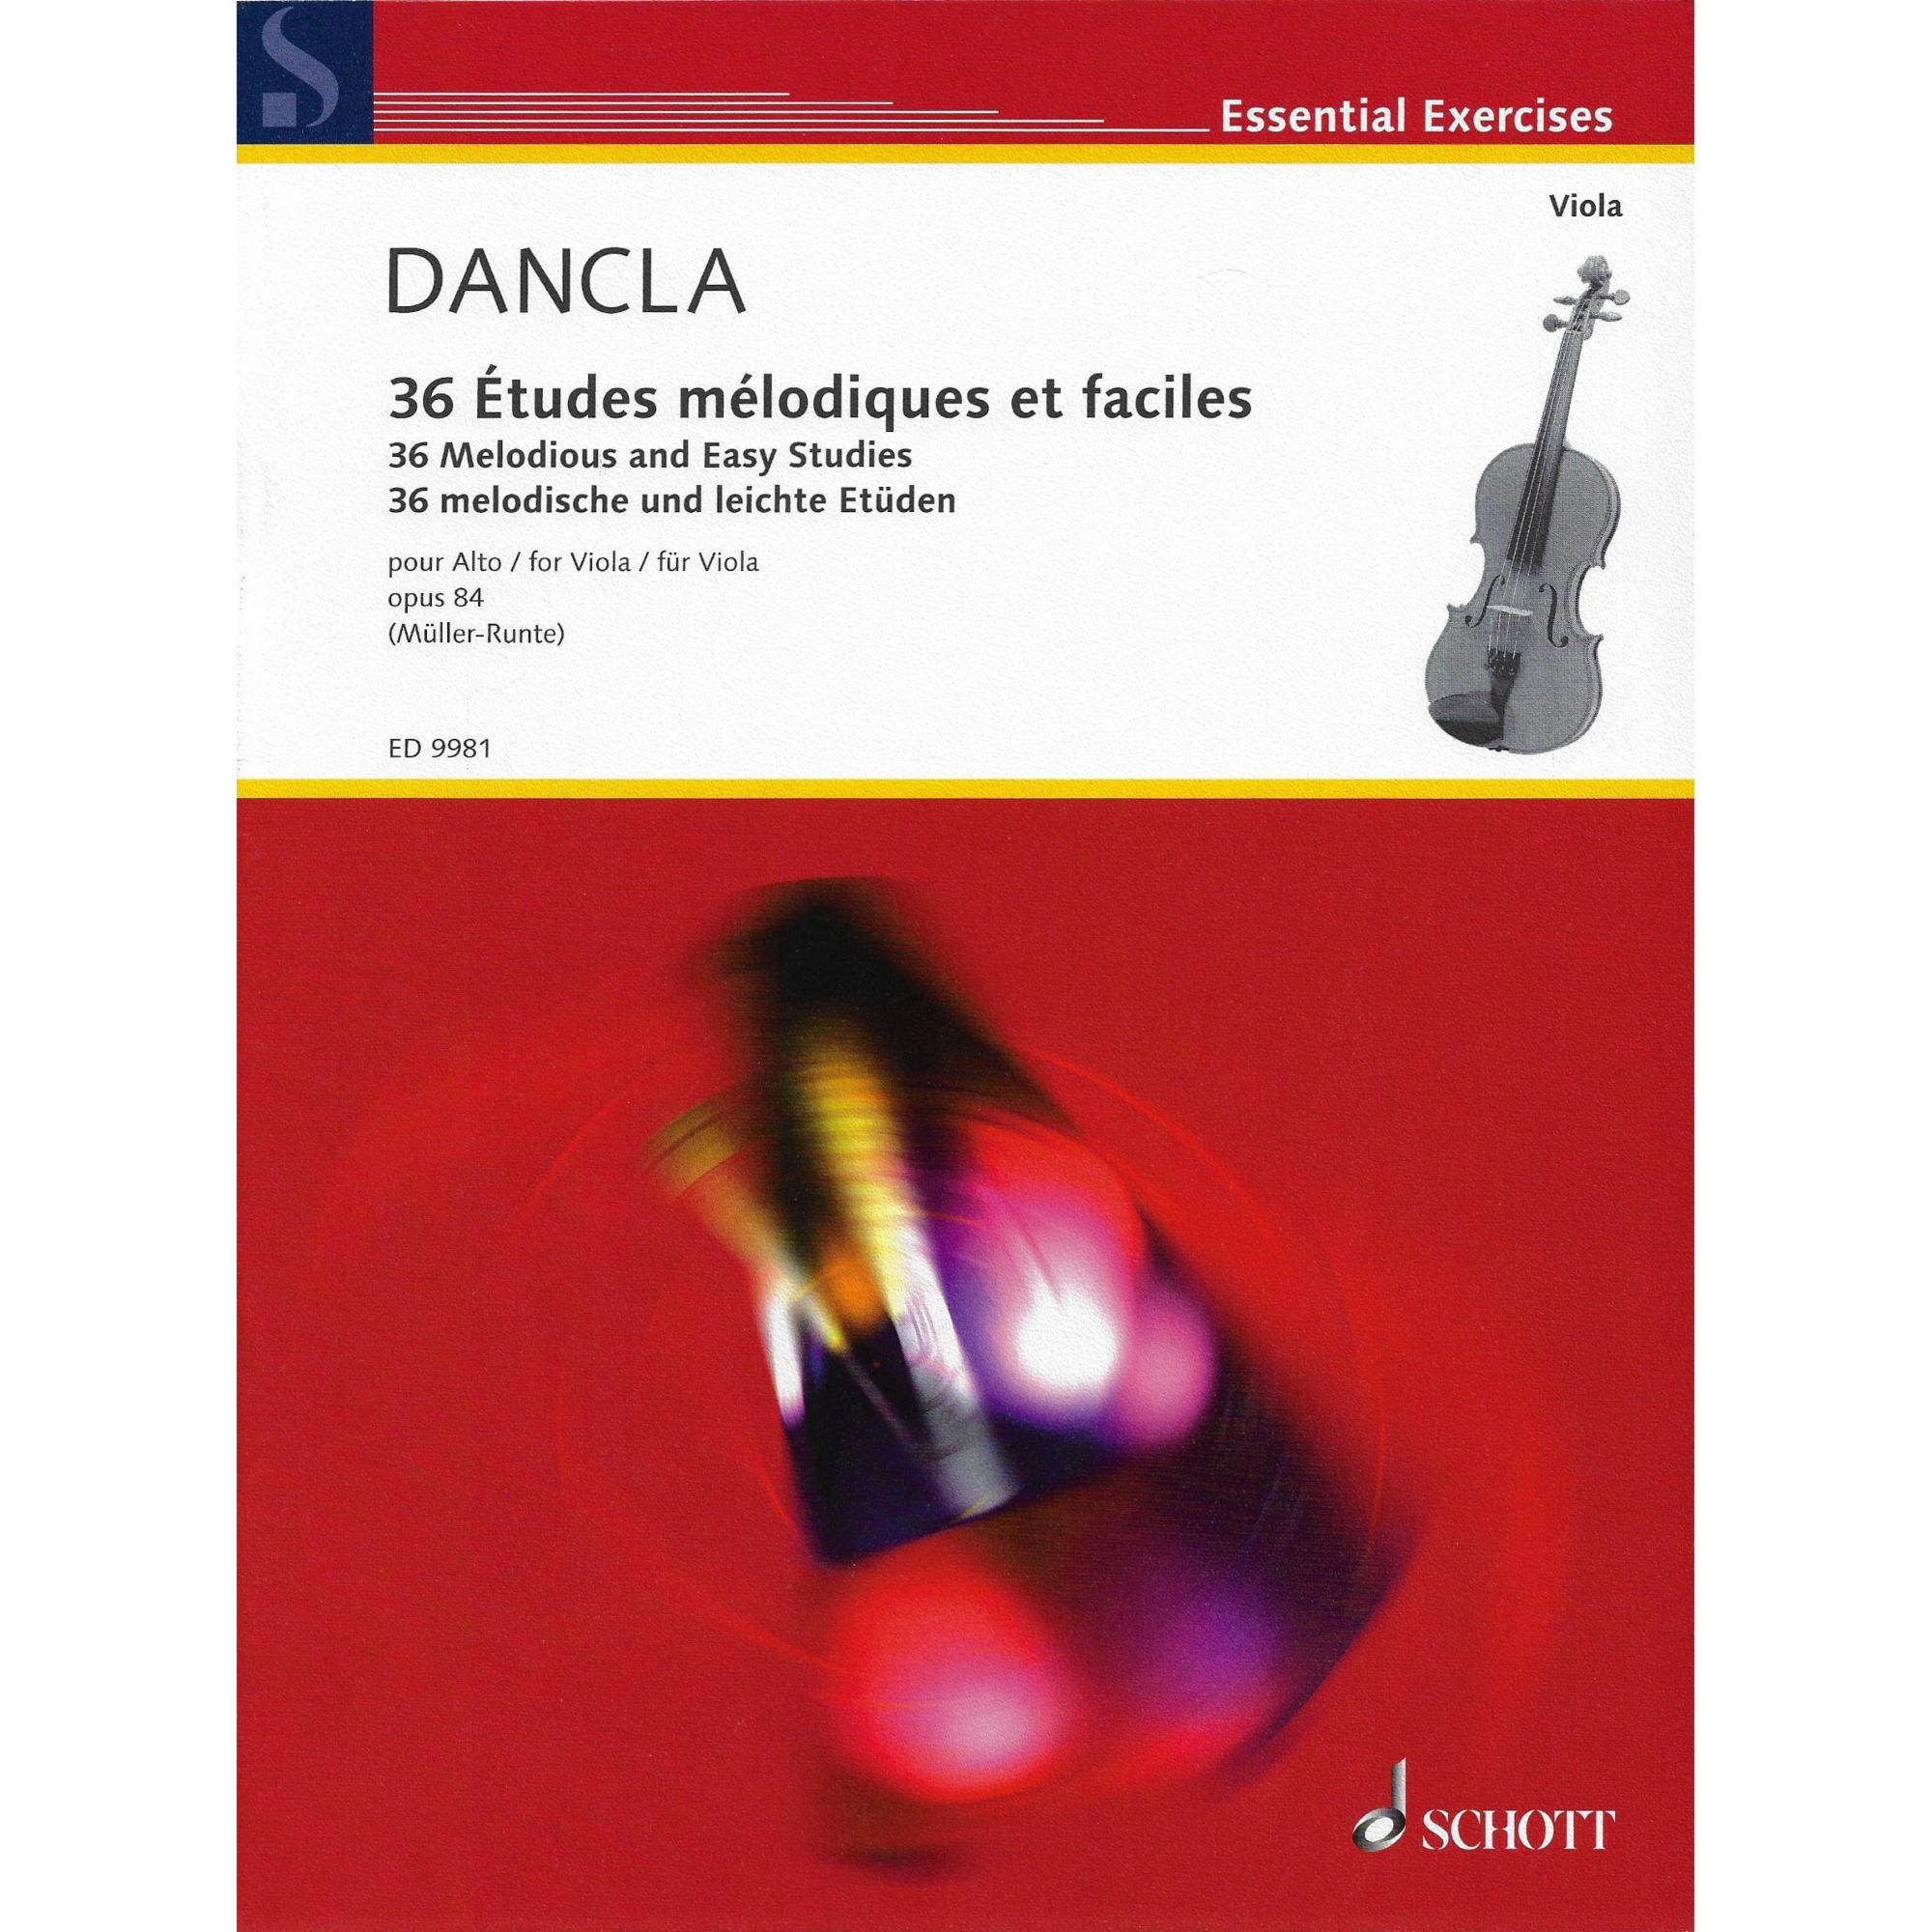 Dancla -- 36 Melodious and Easy Studies, Op. 84 for Viola